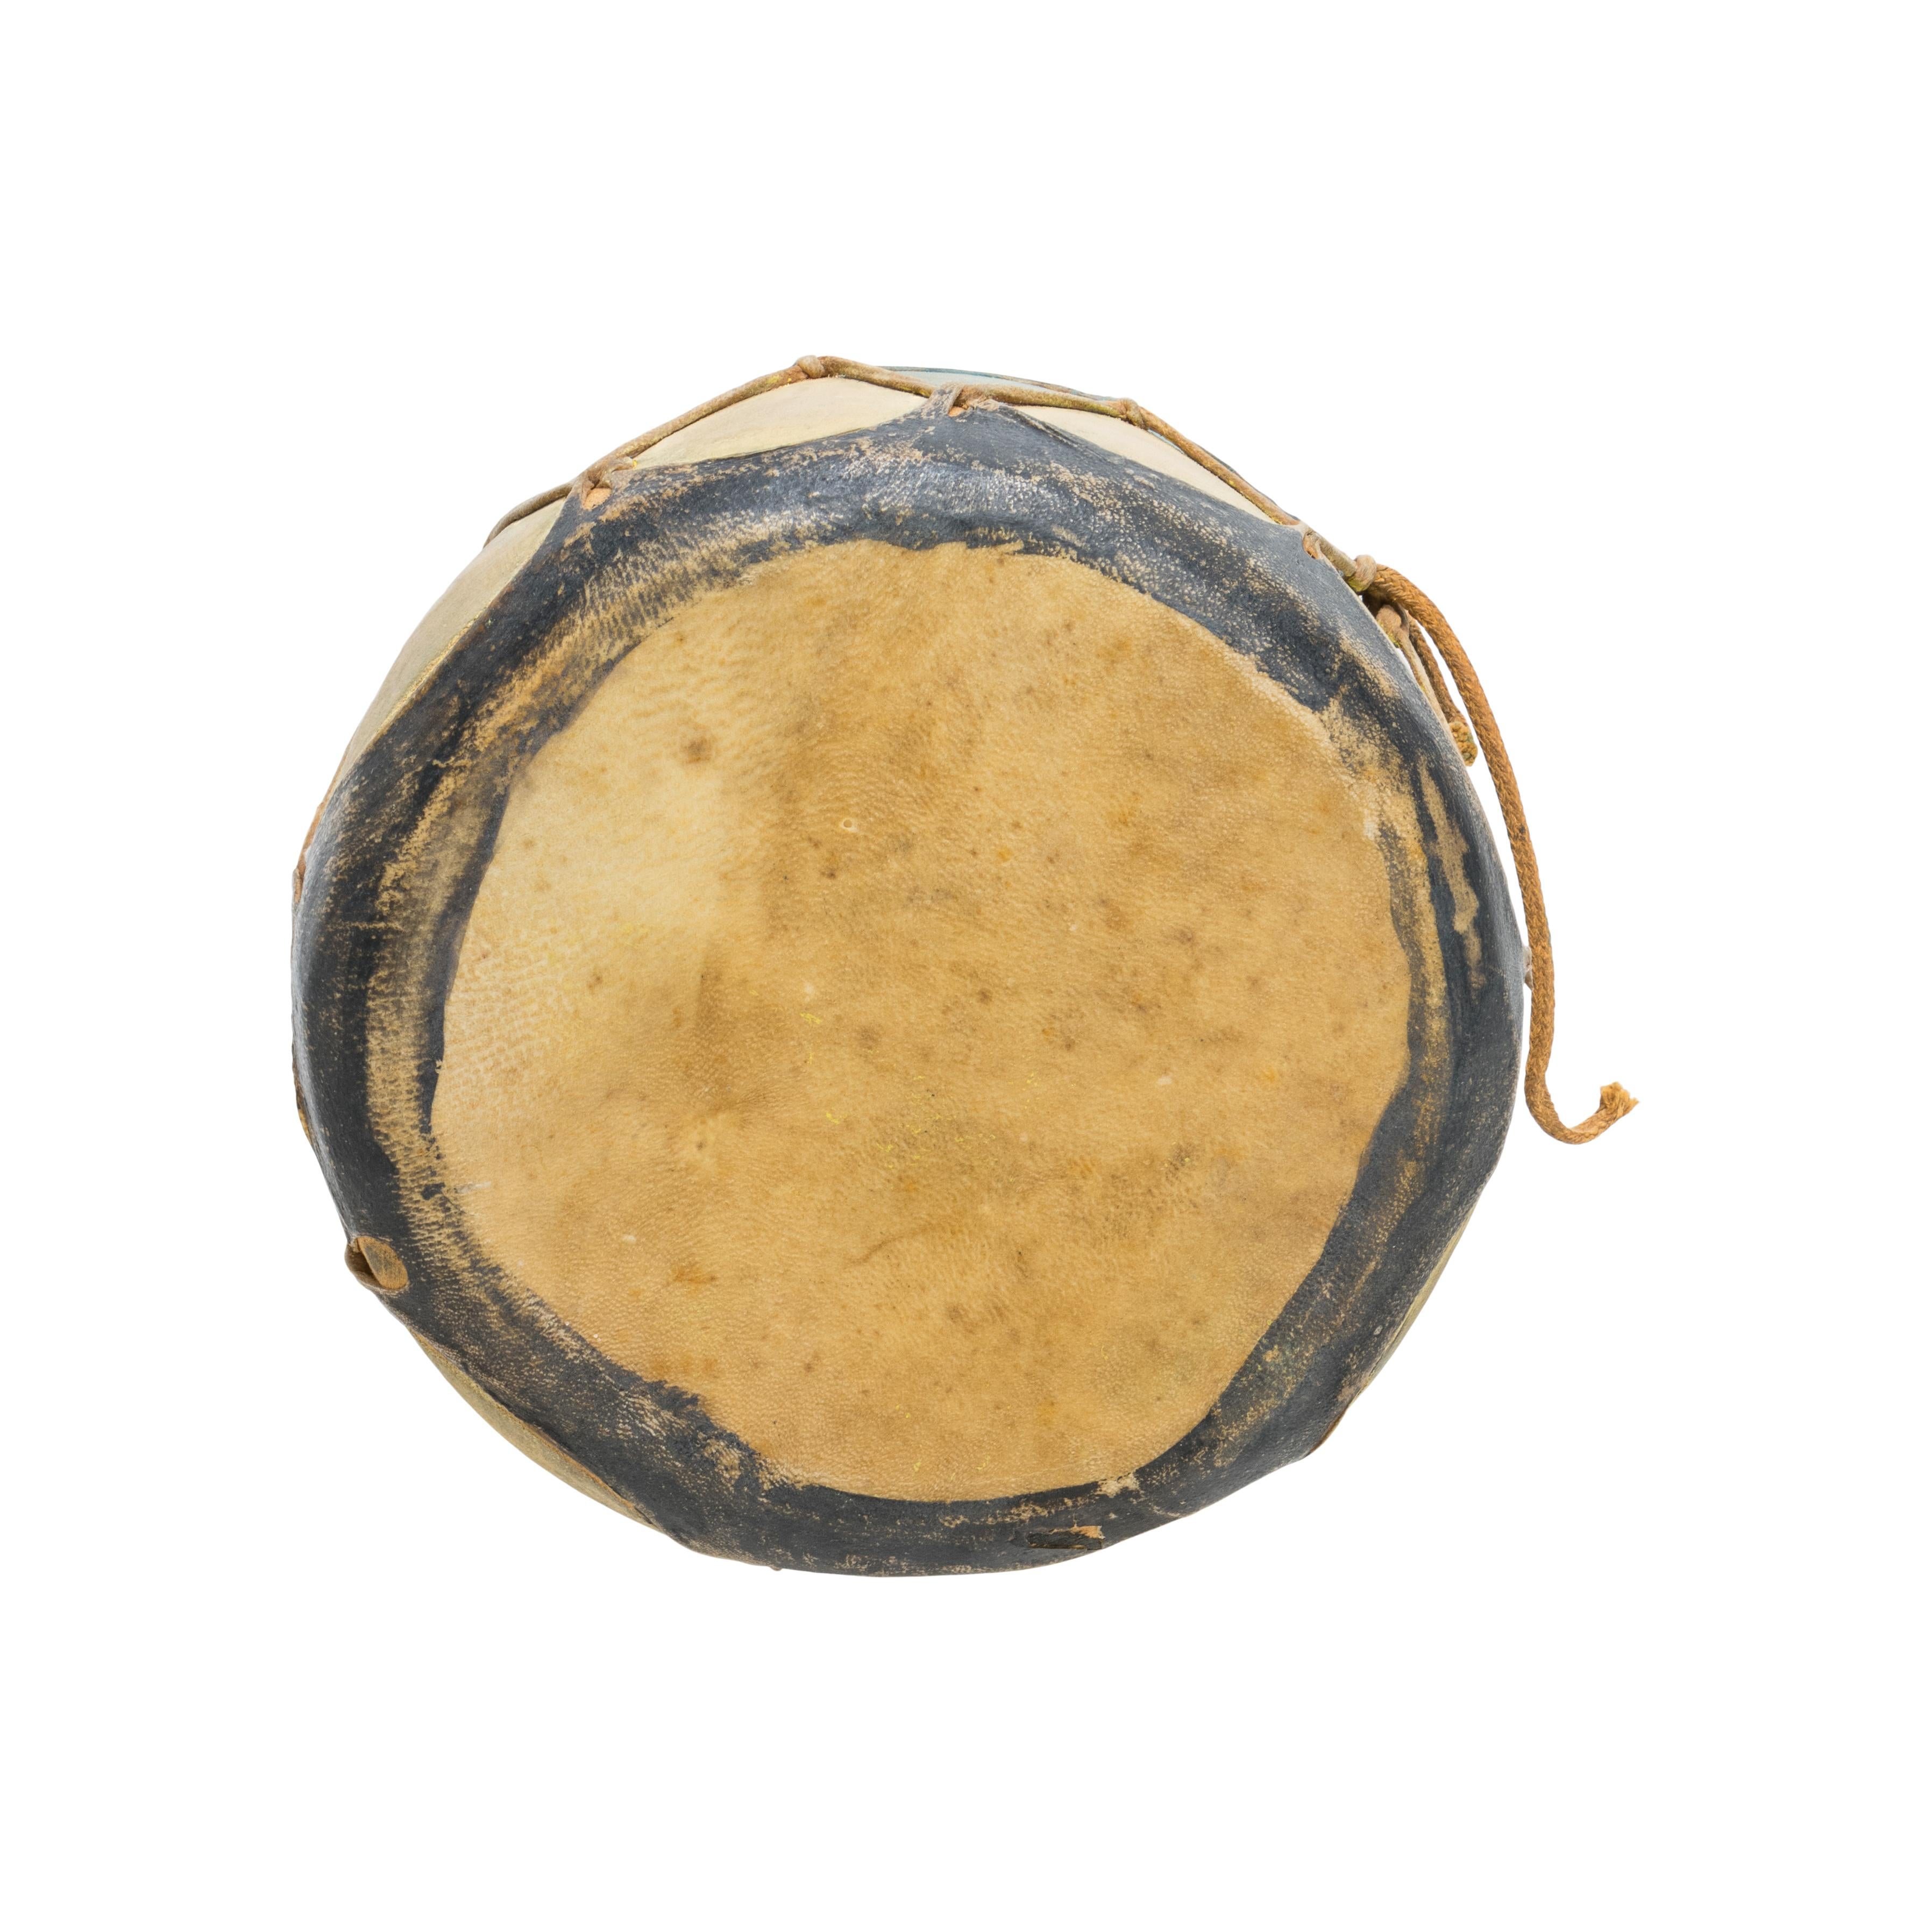 Small Native American Cochiti painted drum with sides painted in mustard yellow and blue with black striping. Made of wood and hide. 

Period: Early 20th century

Origin: Southwest, Cochiti

Size: 7